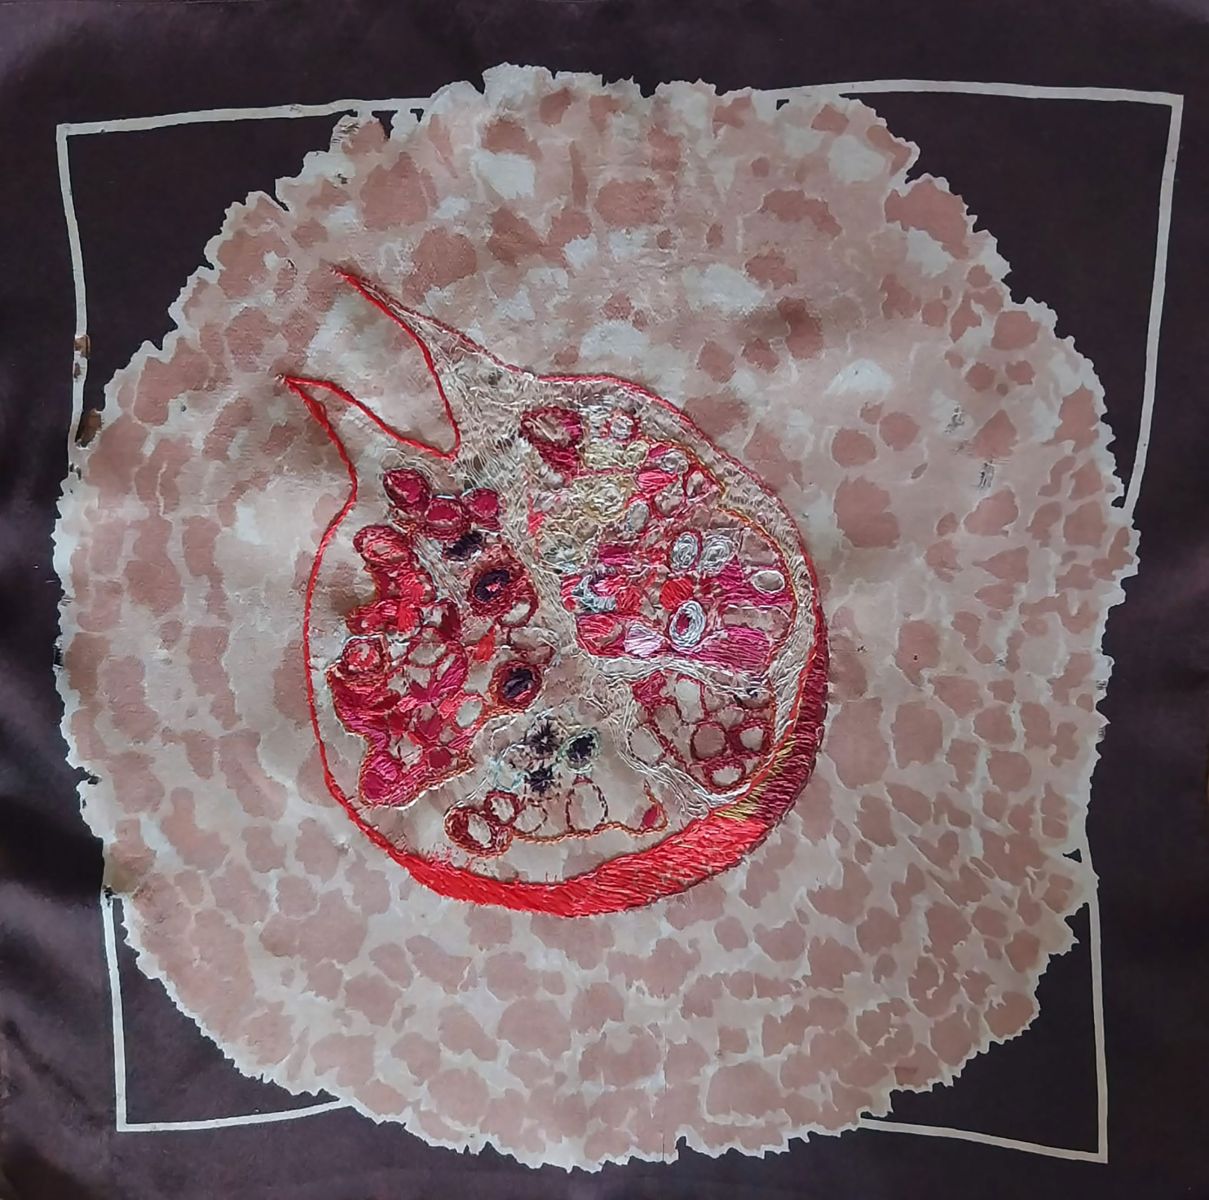 pink embroidery on black background, showing schematic representation of the cross-section of a pomegranate, with seeds inside